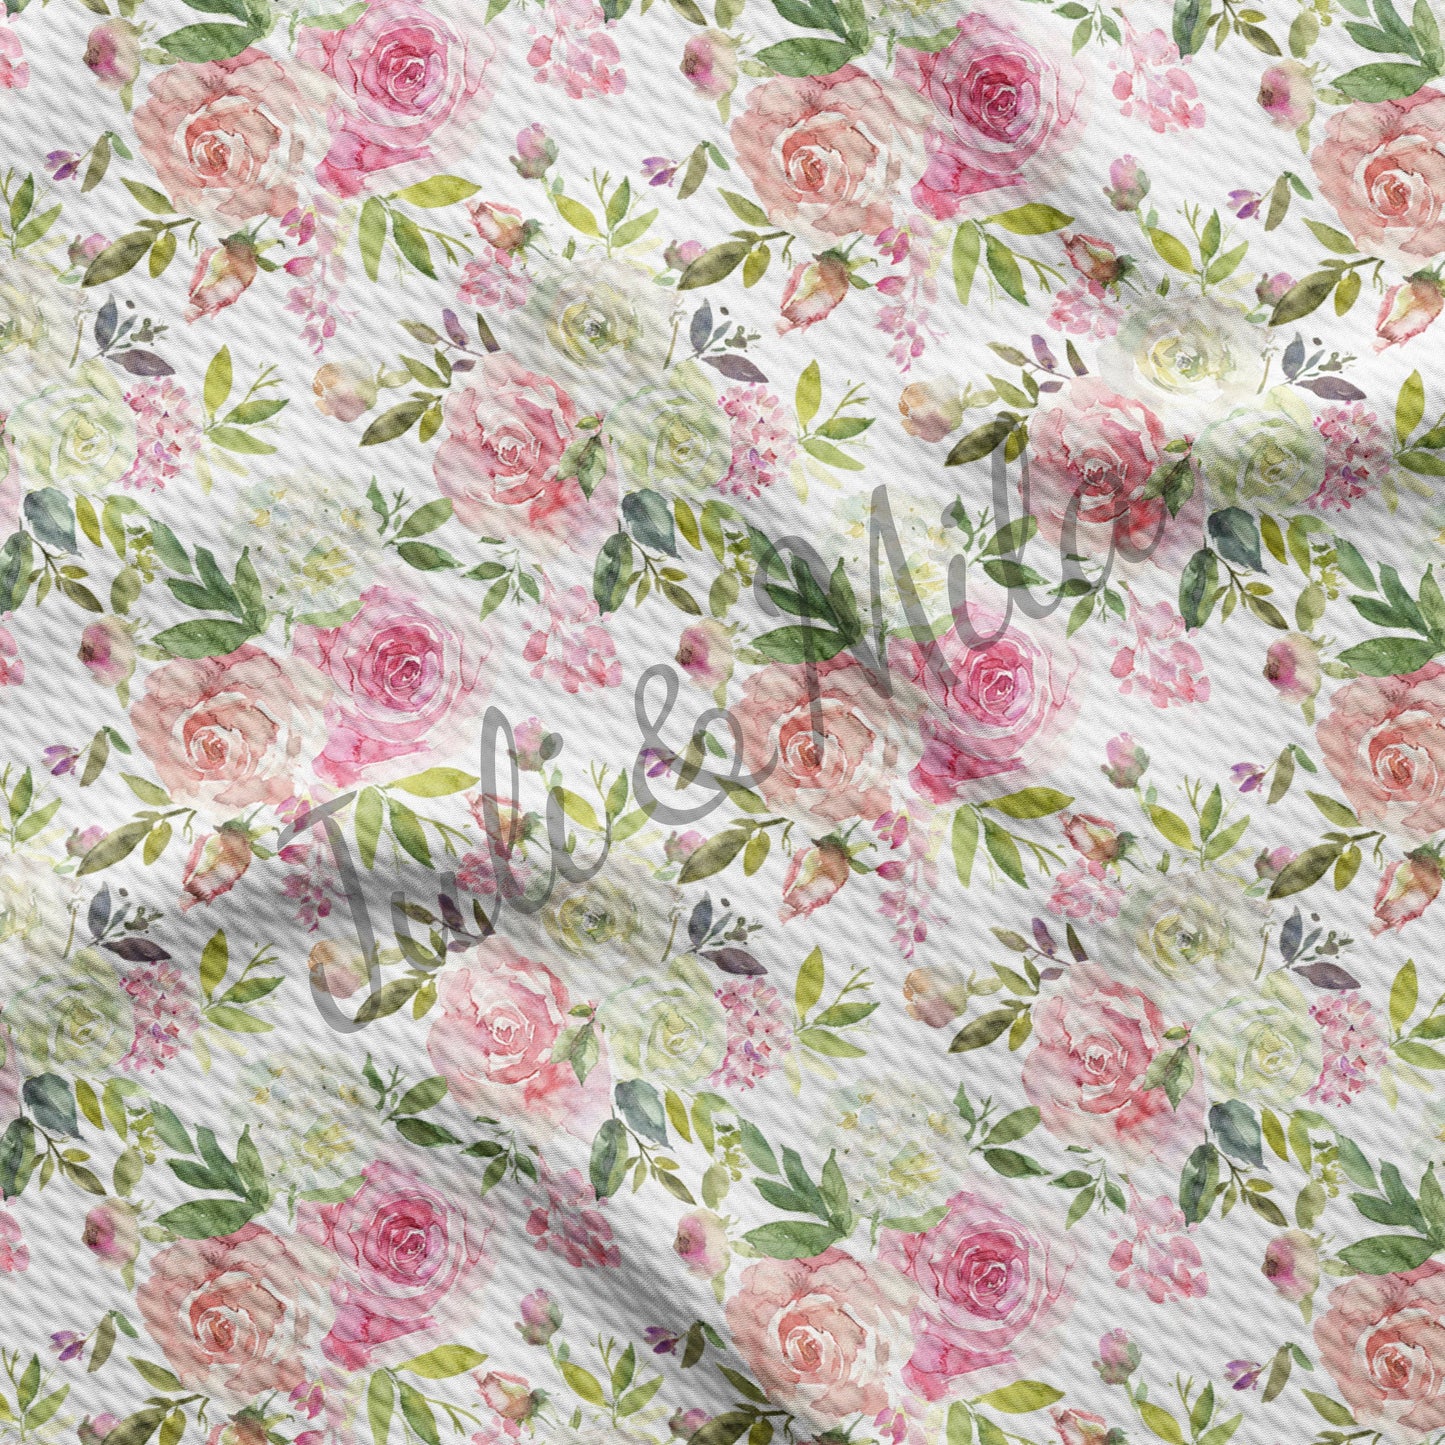 Bullet Textured Fabric Floral  (F23)